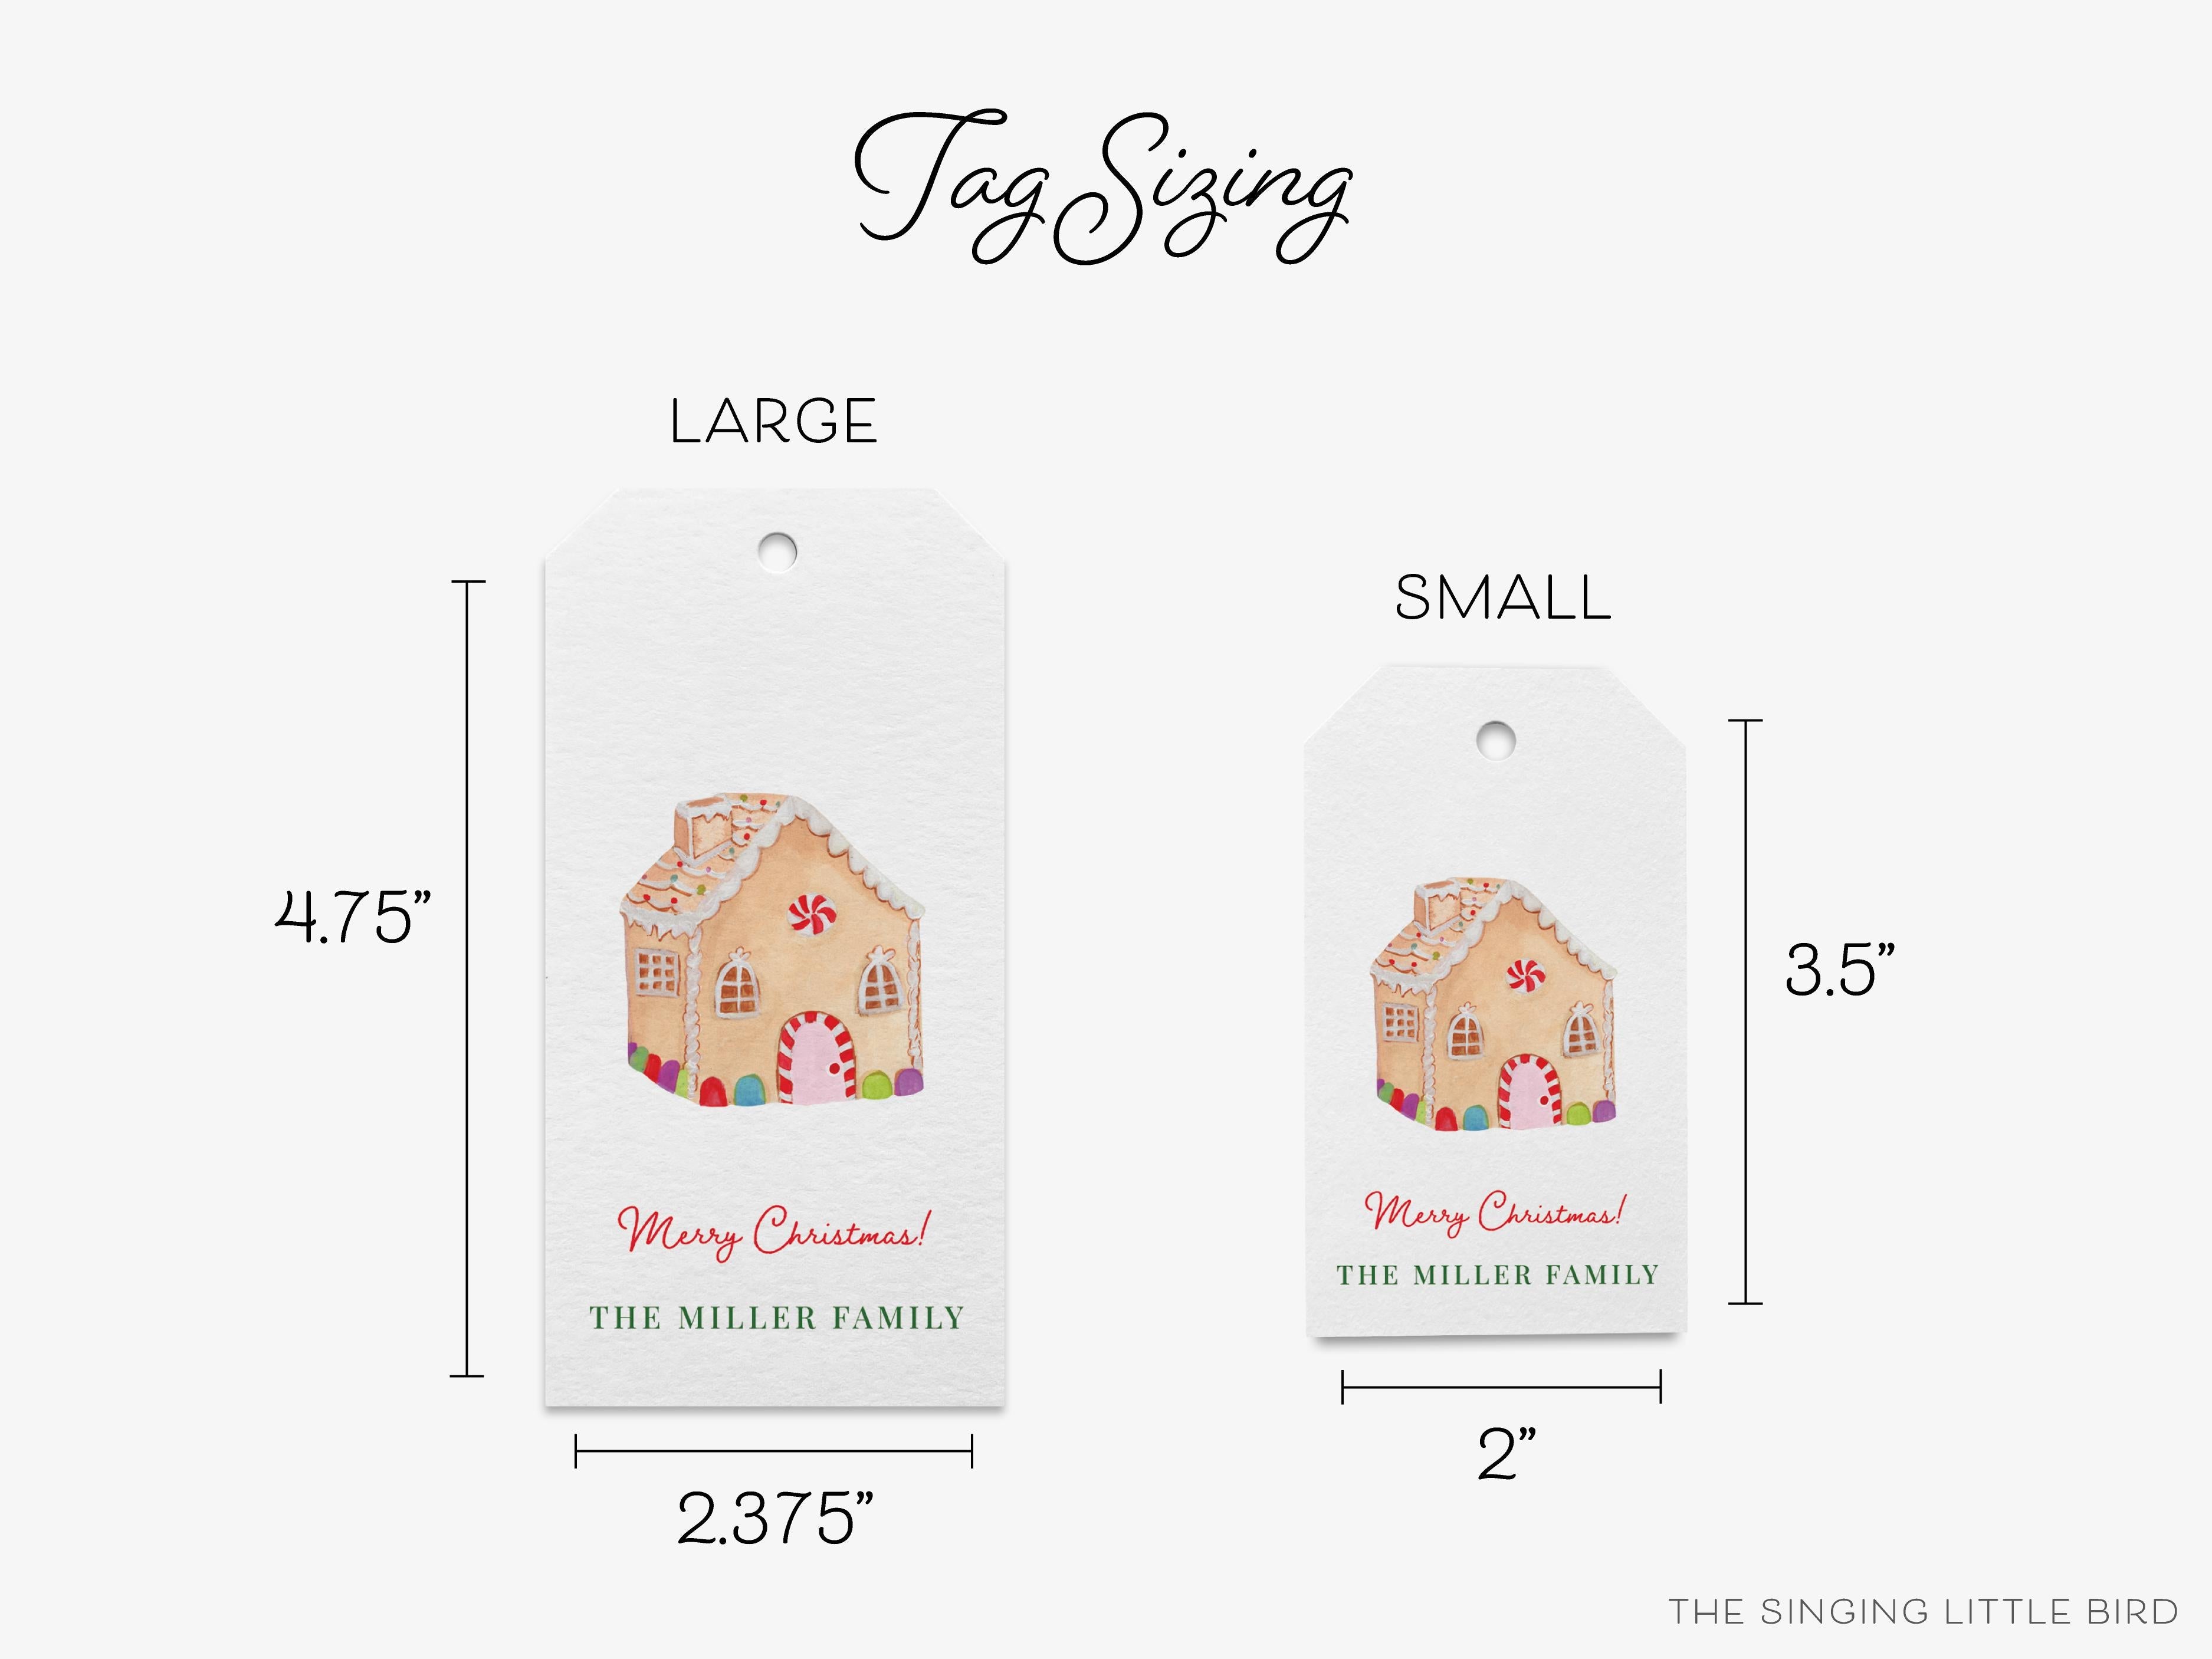 Personalized Gingerbread House Gift Tags-These gift tags come in sets, hole-punched with white twine and feature our hand-painted watercolor gingerbread house and peppermint candy, printed in the USA on 120lb textured stock. They make great tags for gifting or gifts for the holiday sweet tooth lover in your life.-The Singing Little Bird